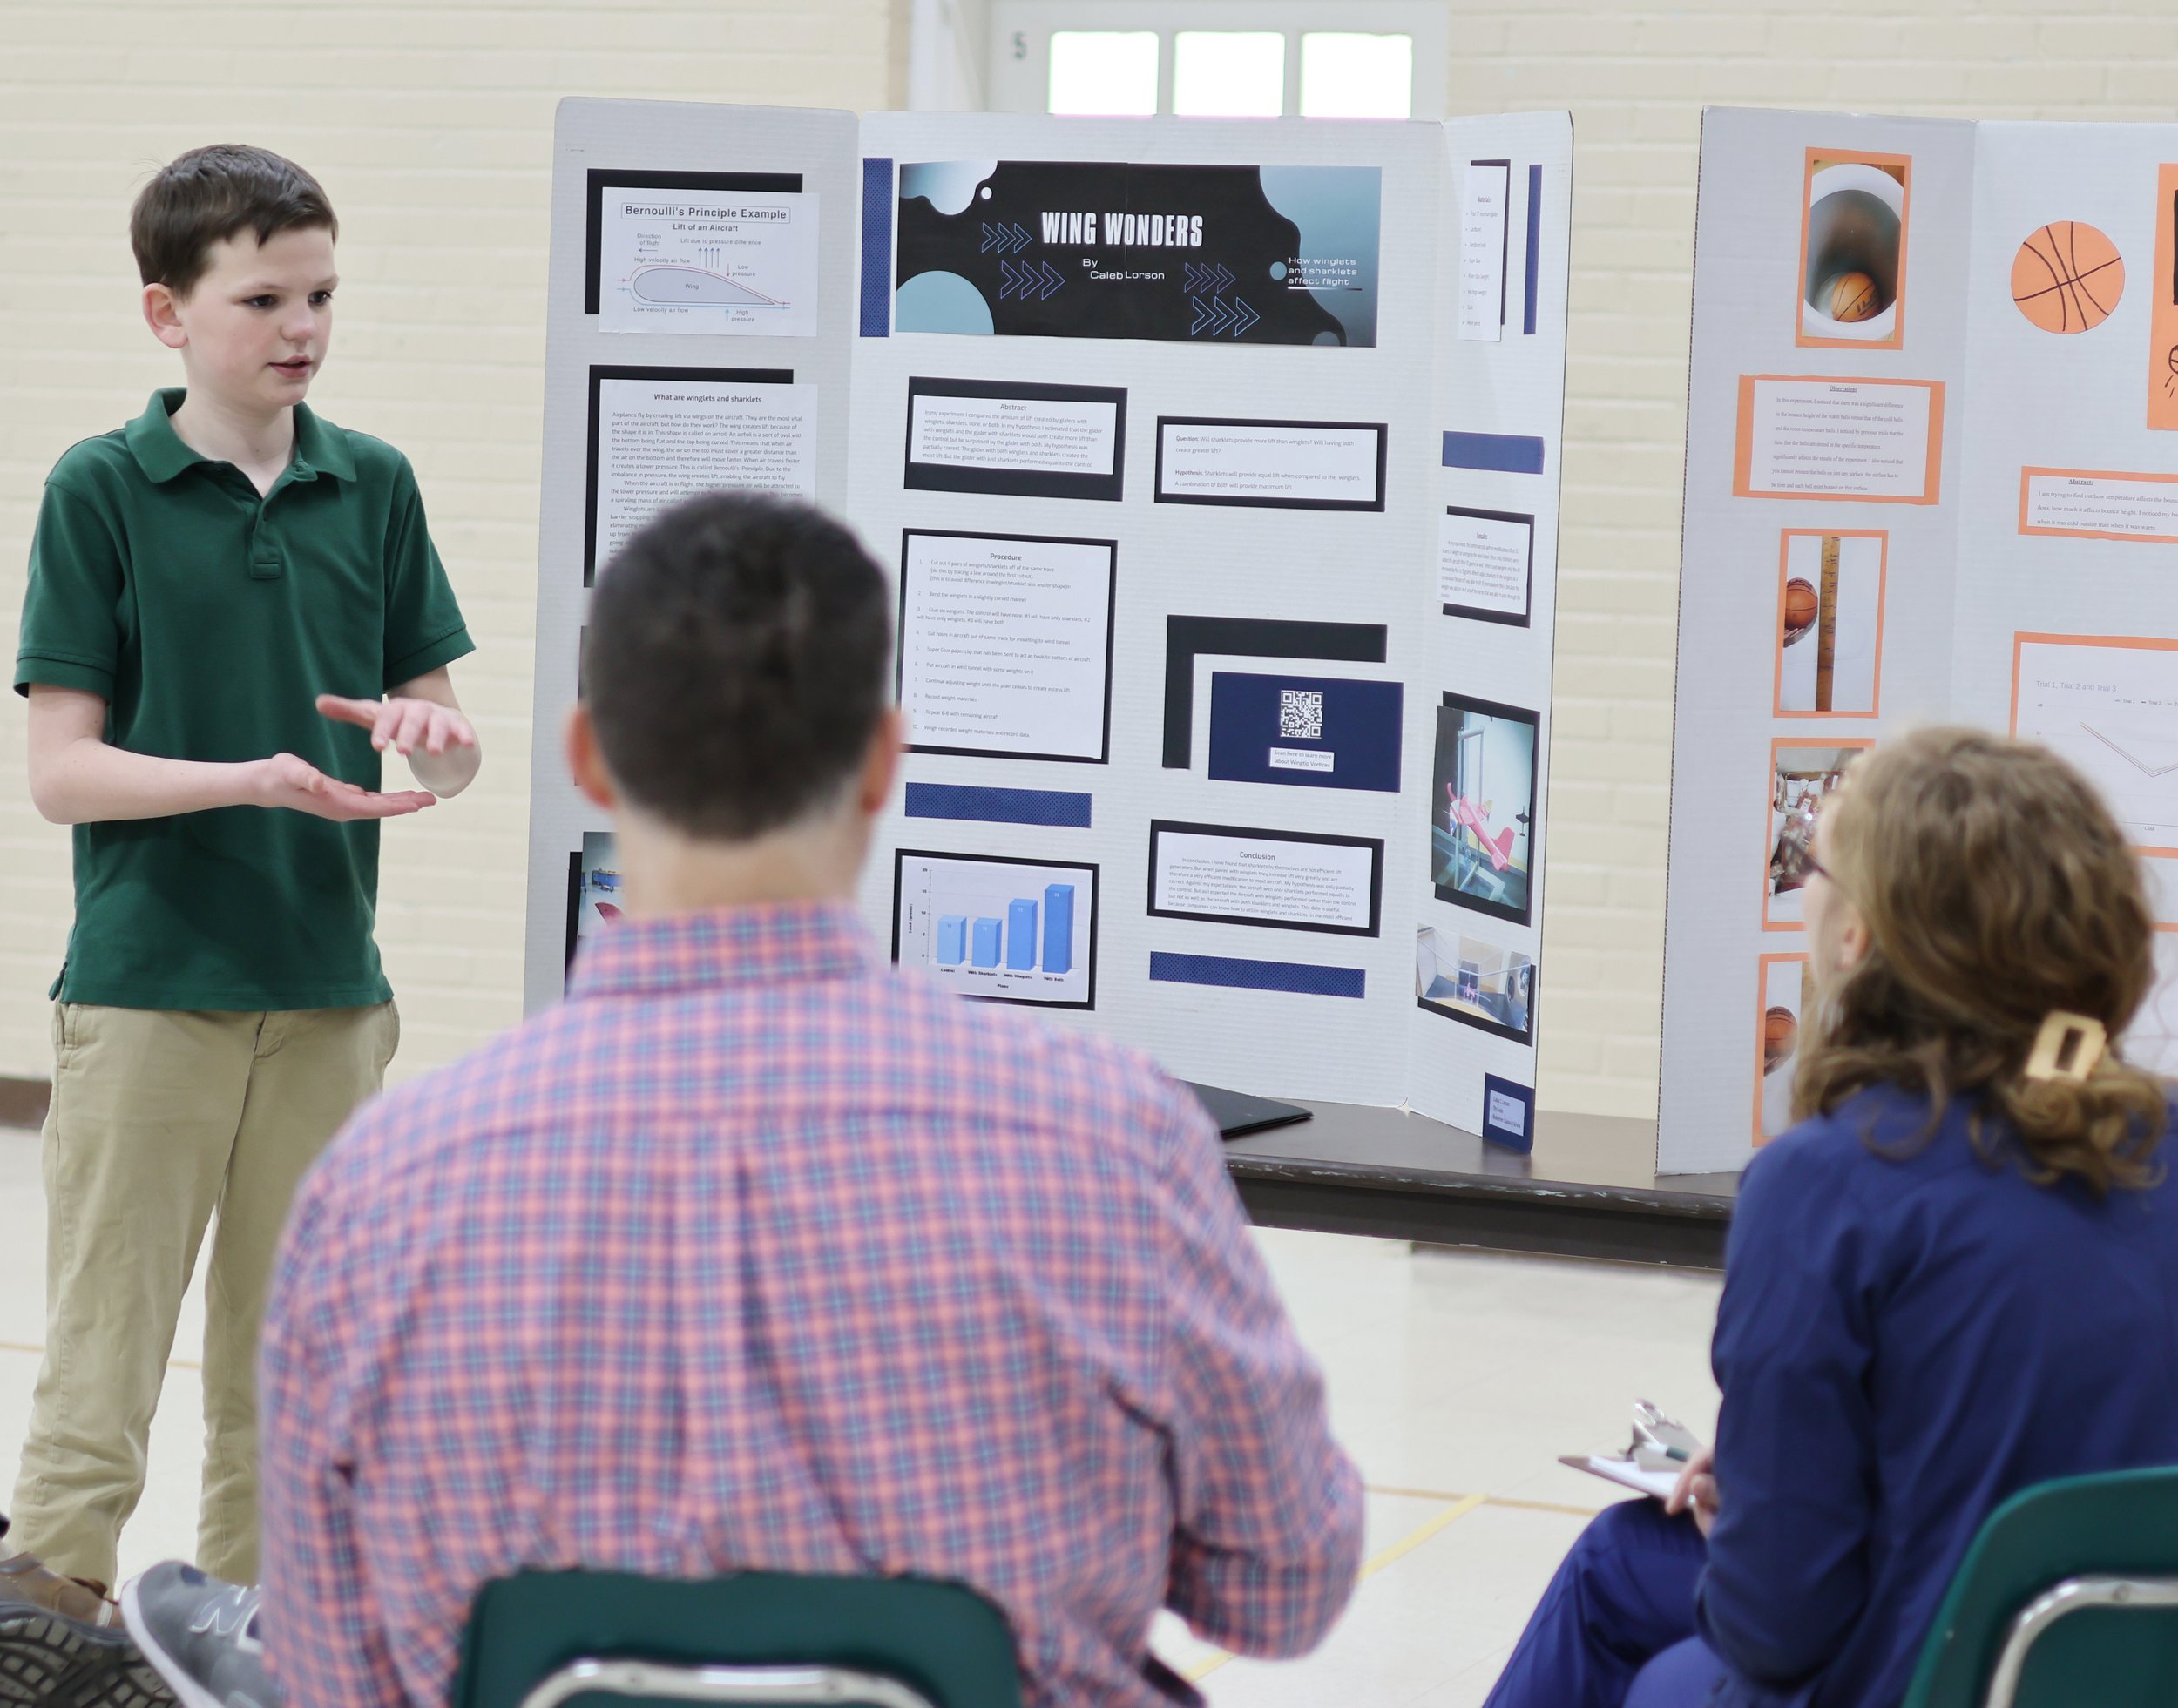 Each logic school student presented their project to the judges